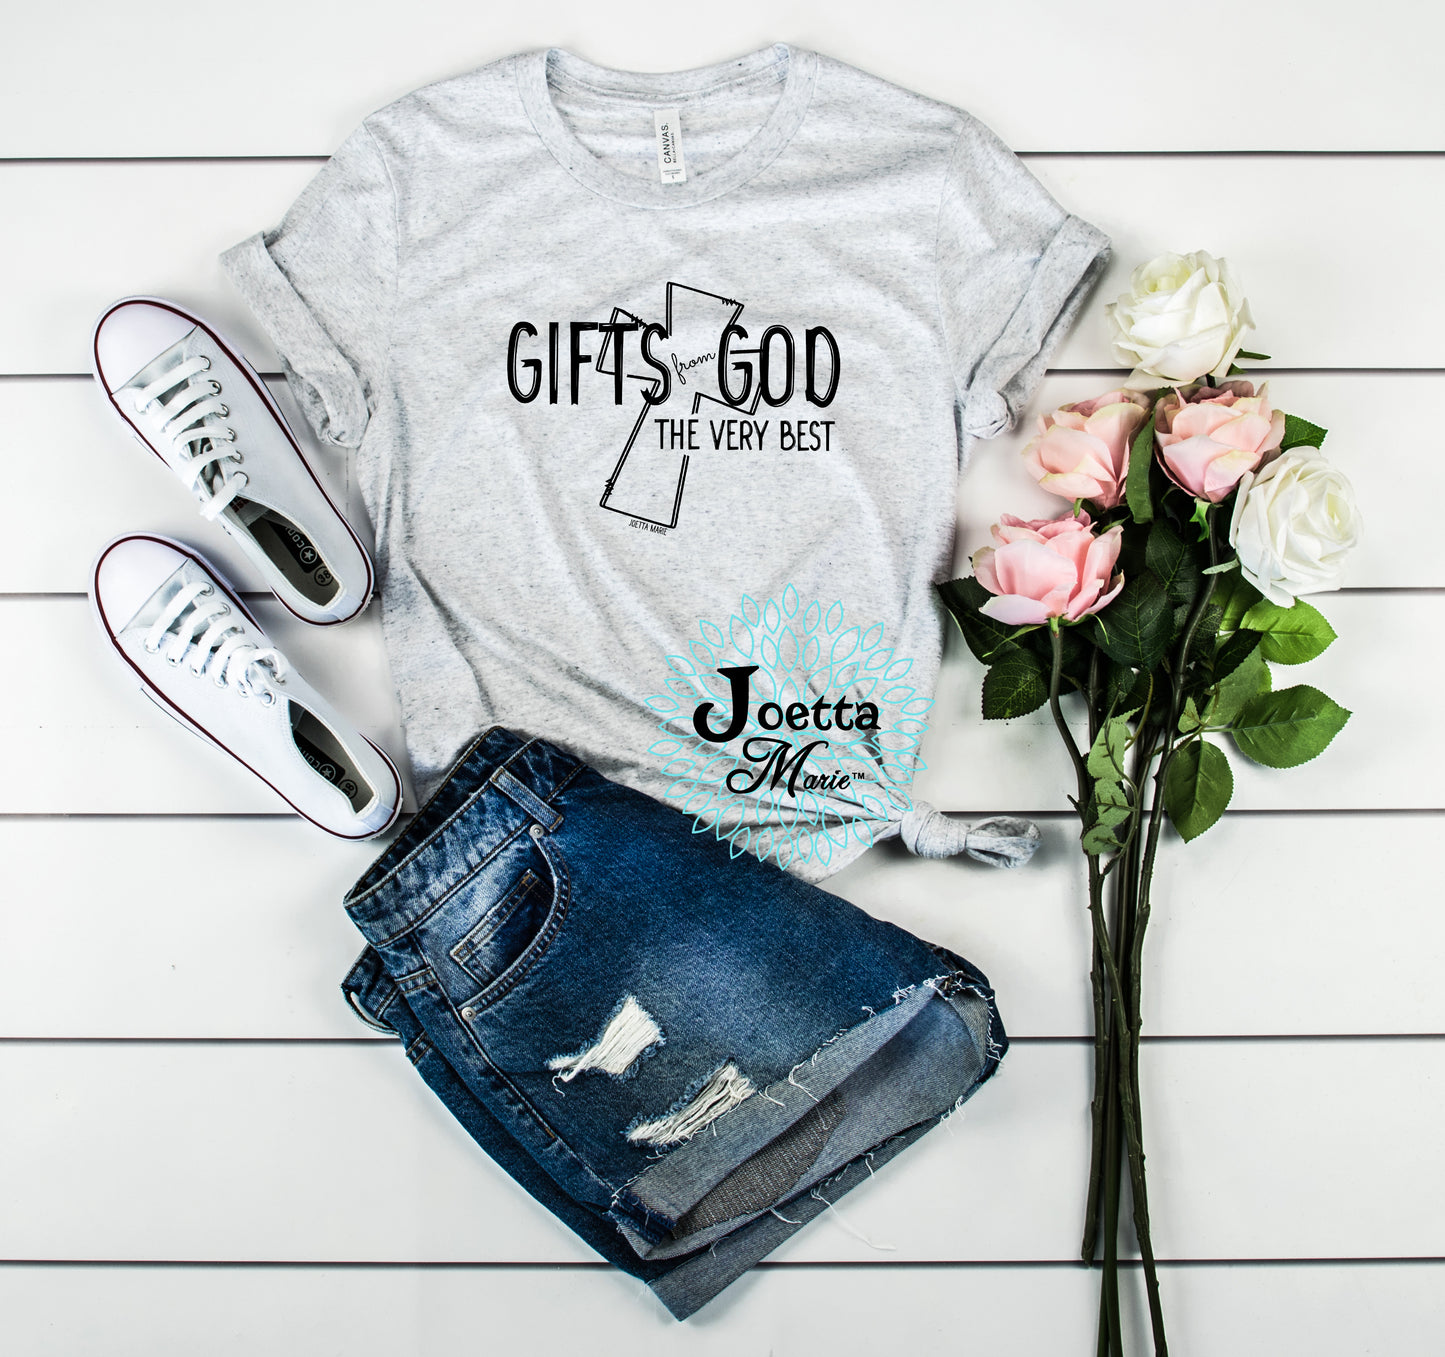 Gifts from God tshirt